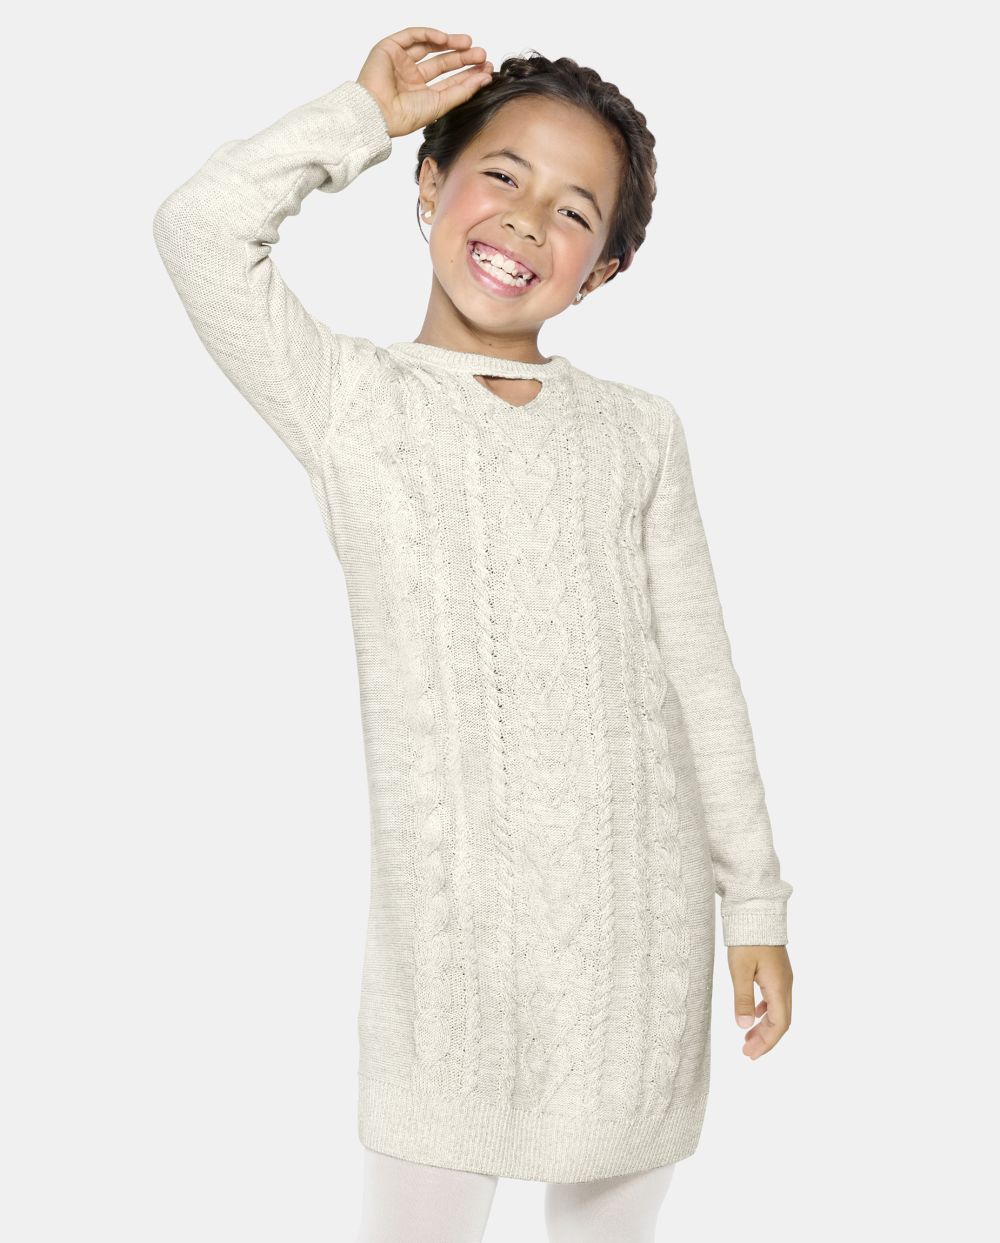 Girls Above the Knee Cutout Sweater Crew Neck Long Sleeves Dress